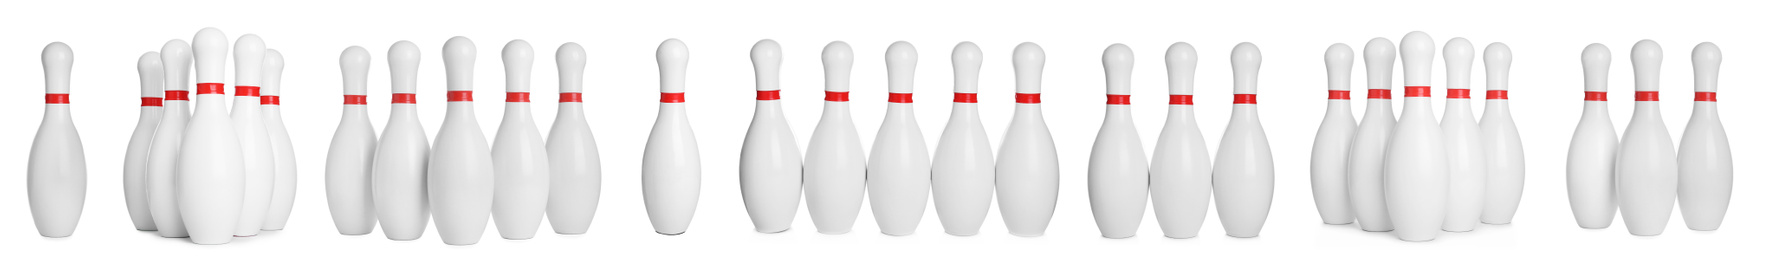 Set of bowling pins with red stripes on white background. Banner design